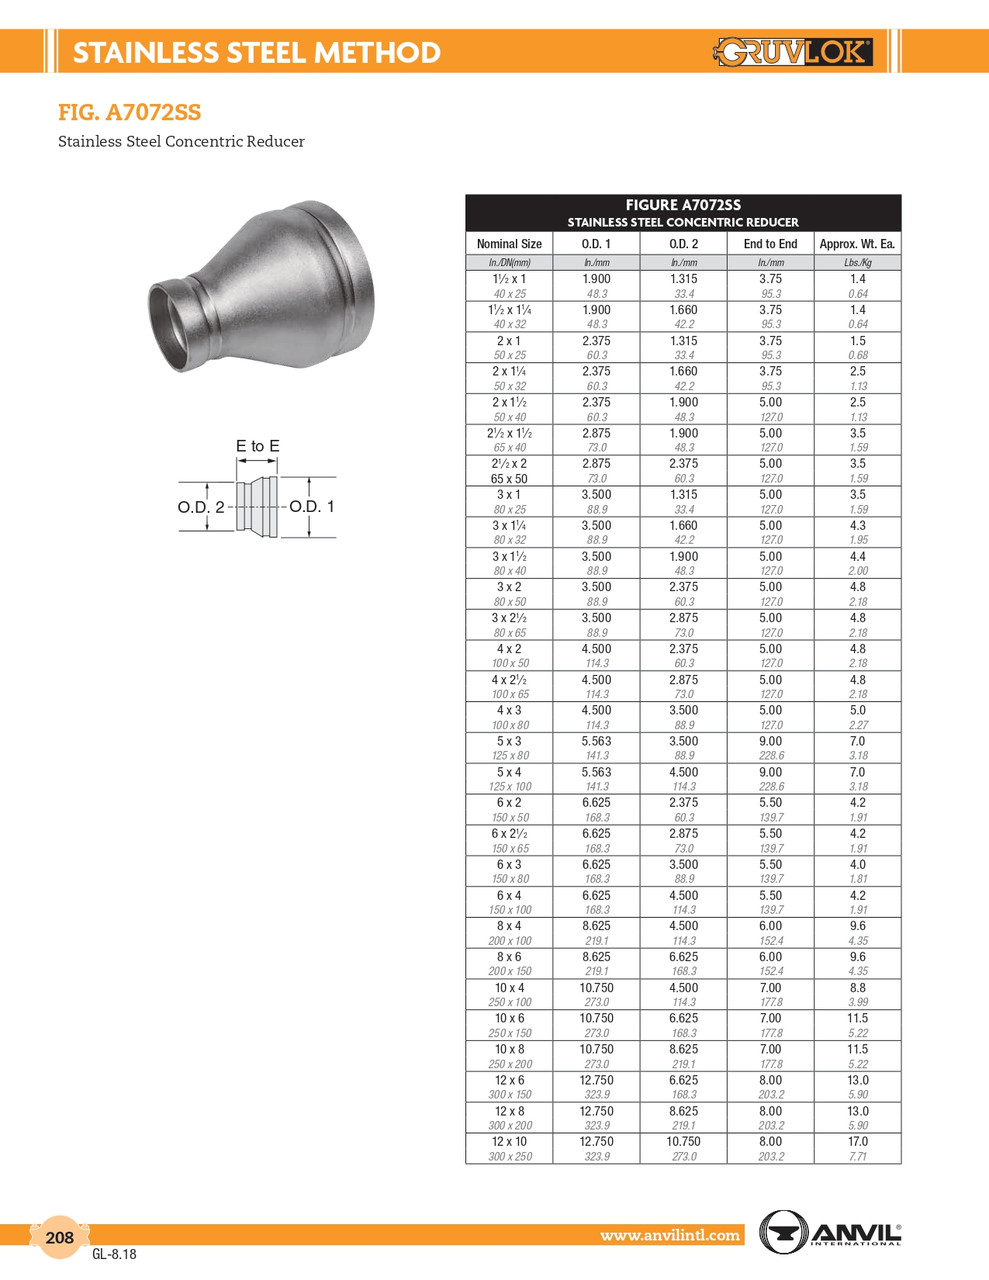 Fig. A7072SS Stainless Concentric Reducer 12 x 10"